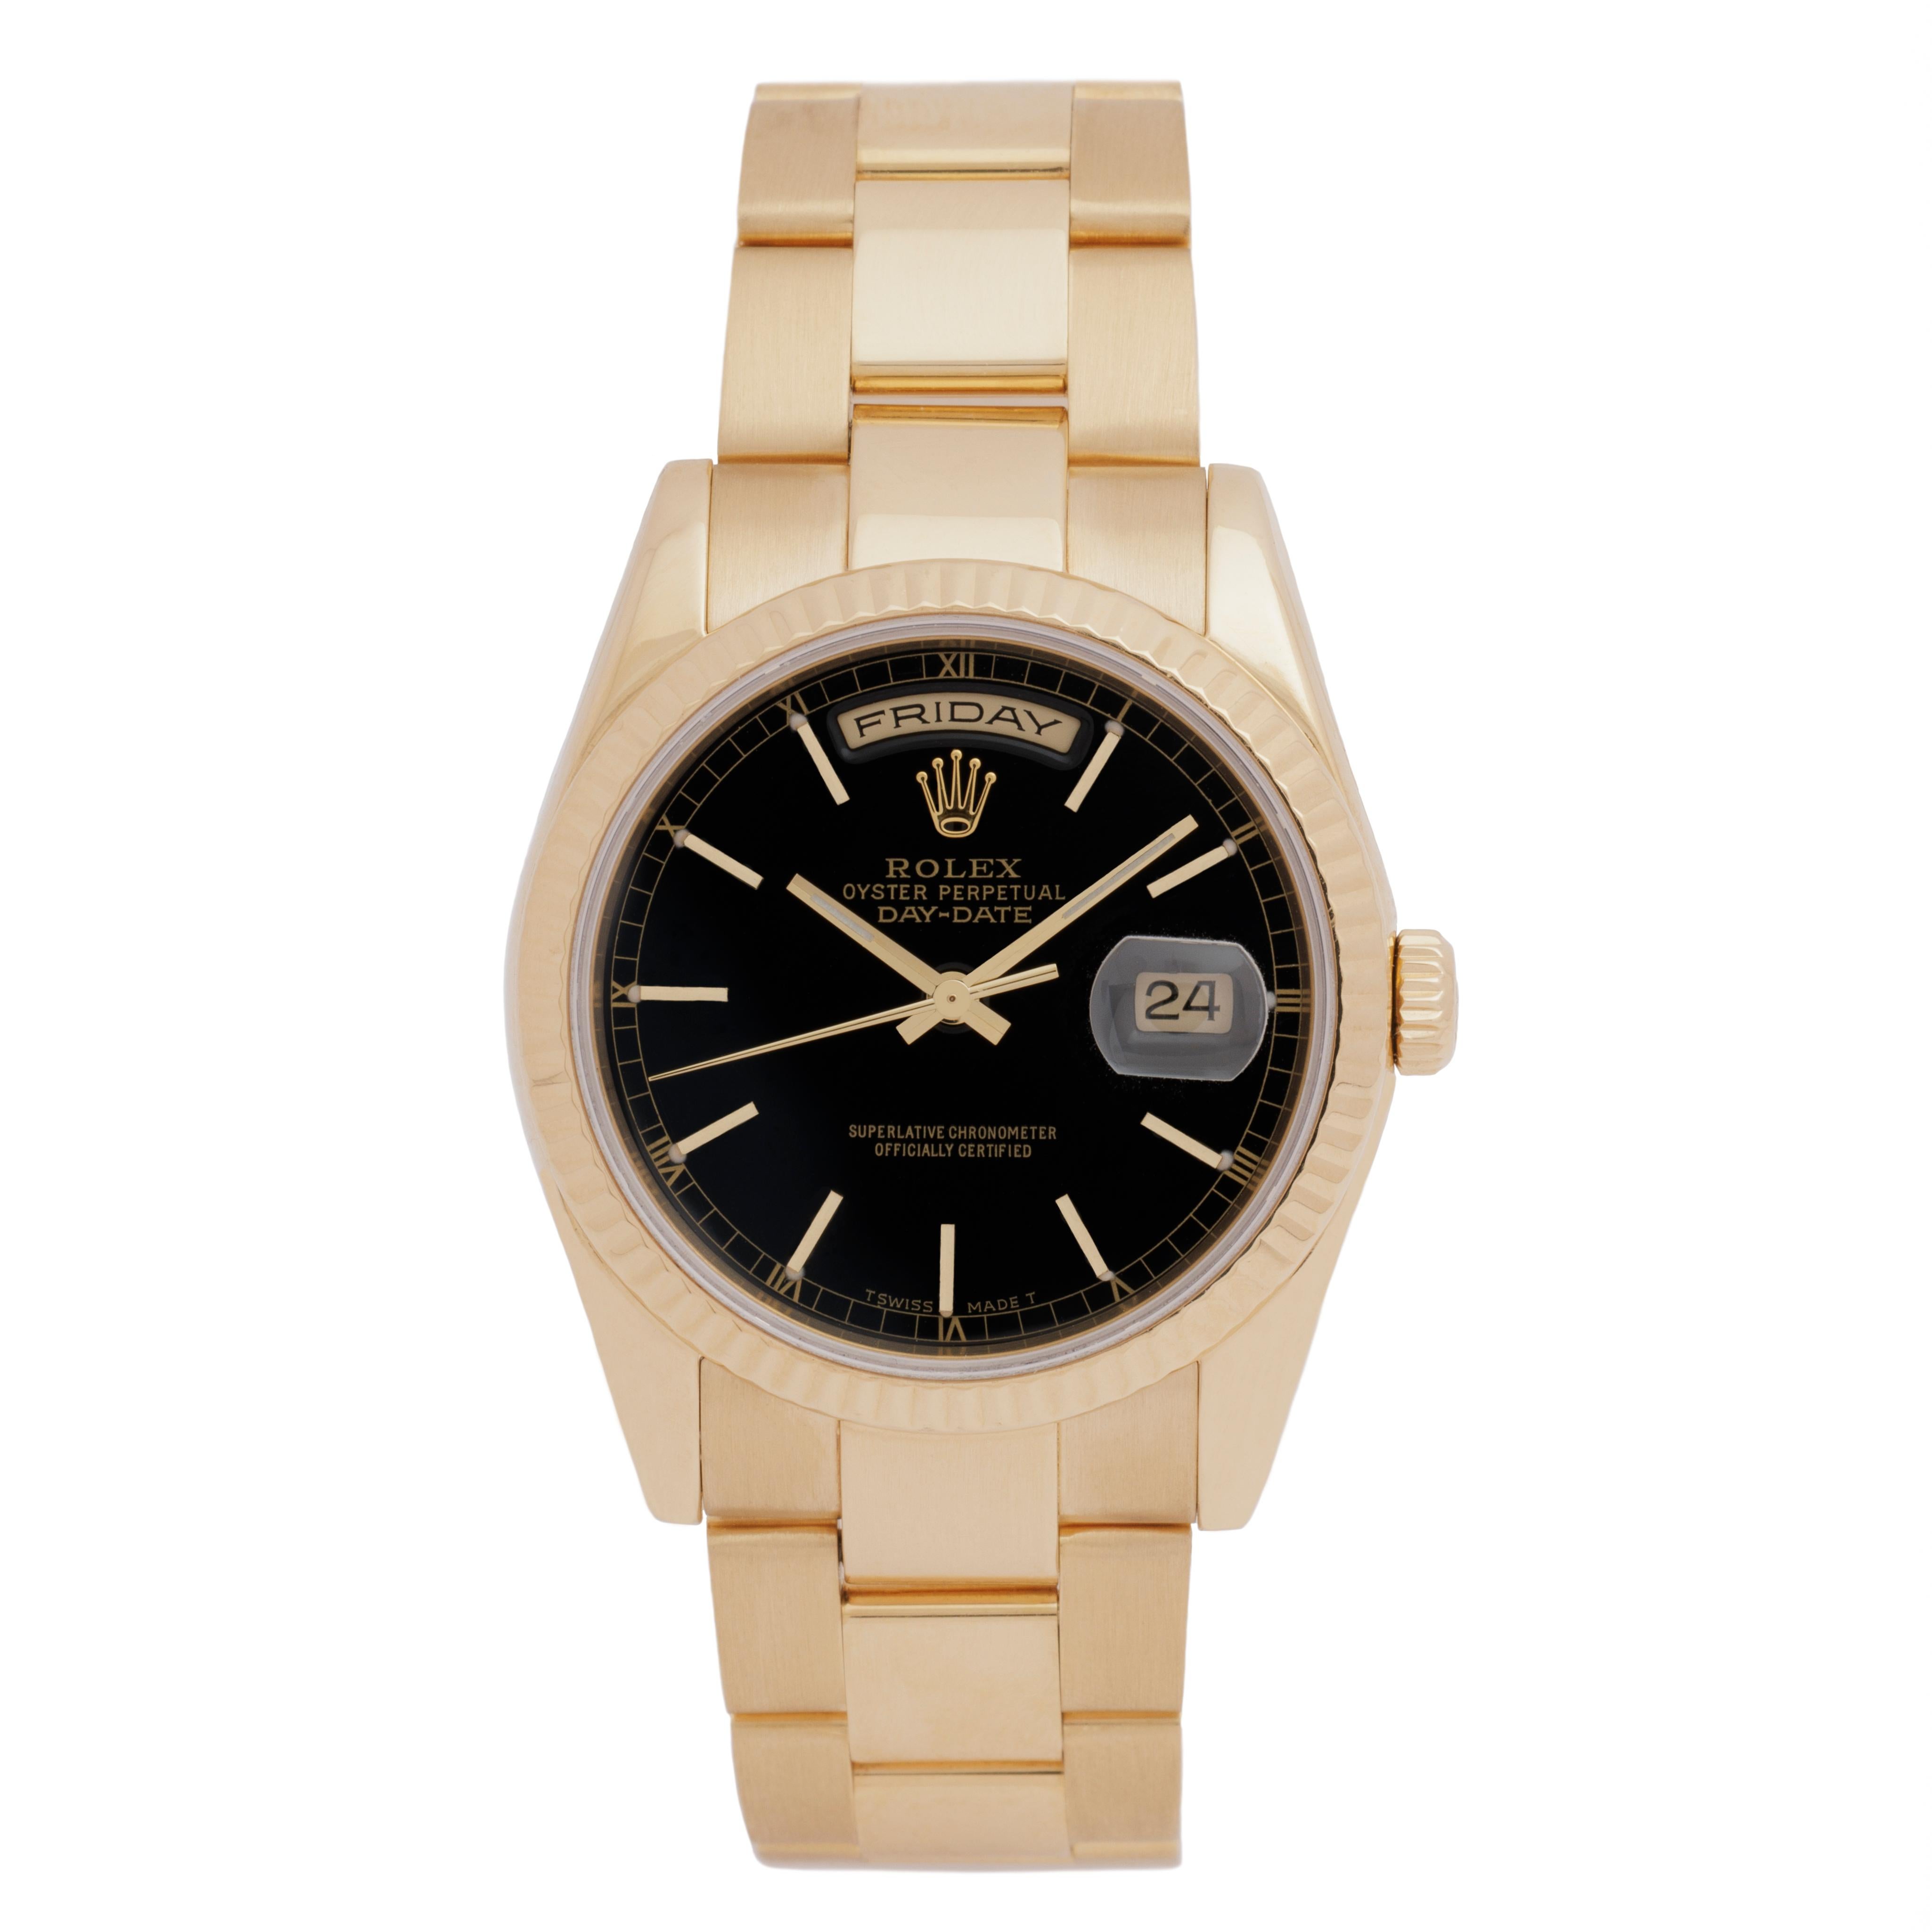 Rolex Day-Date President 118238
36mm
Black Dial - Gold Stick Markers  
18 Karat Yellow Gold 
Automatic Movement
with Original Box
c.2000

The 1986 Rolex Day-Date President is the crown jewel of the Rolex catalog. Debuting in 1956,
the Day-Date is